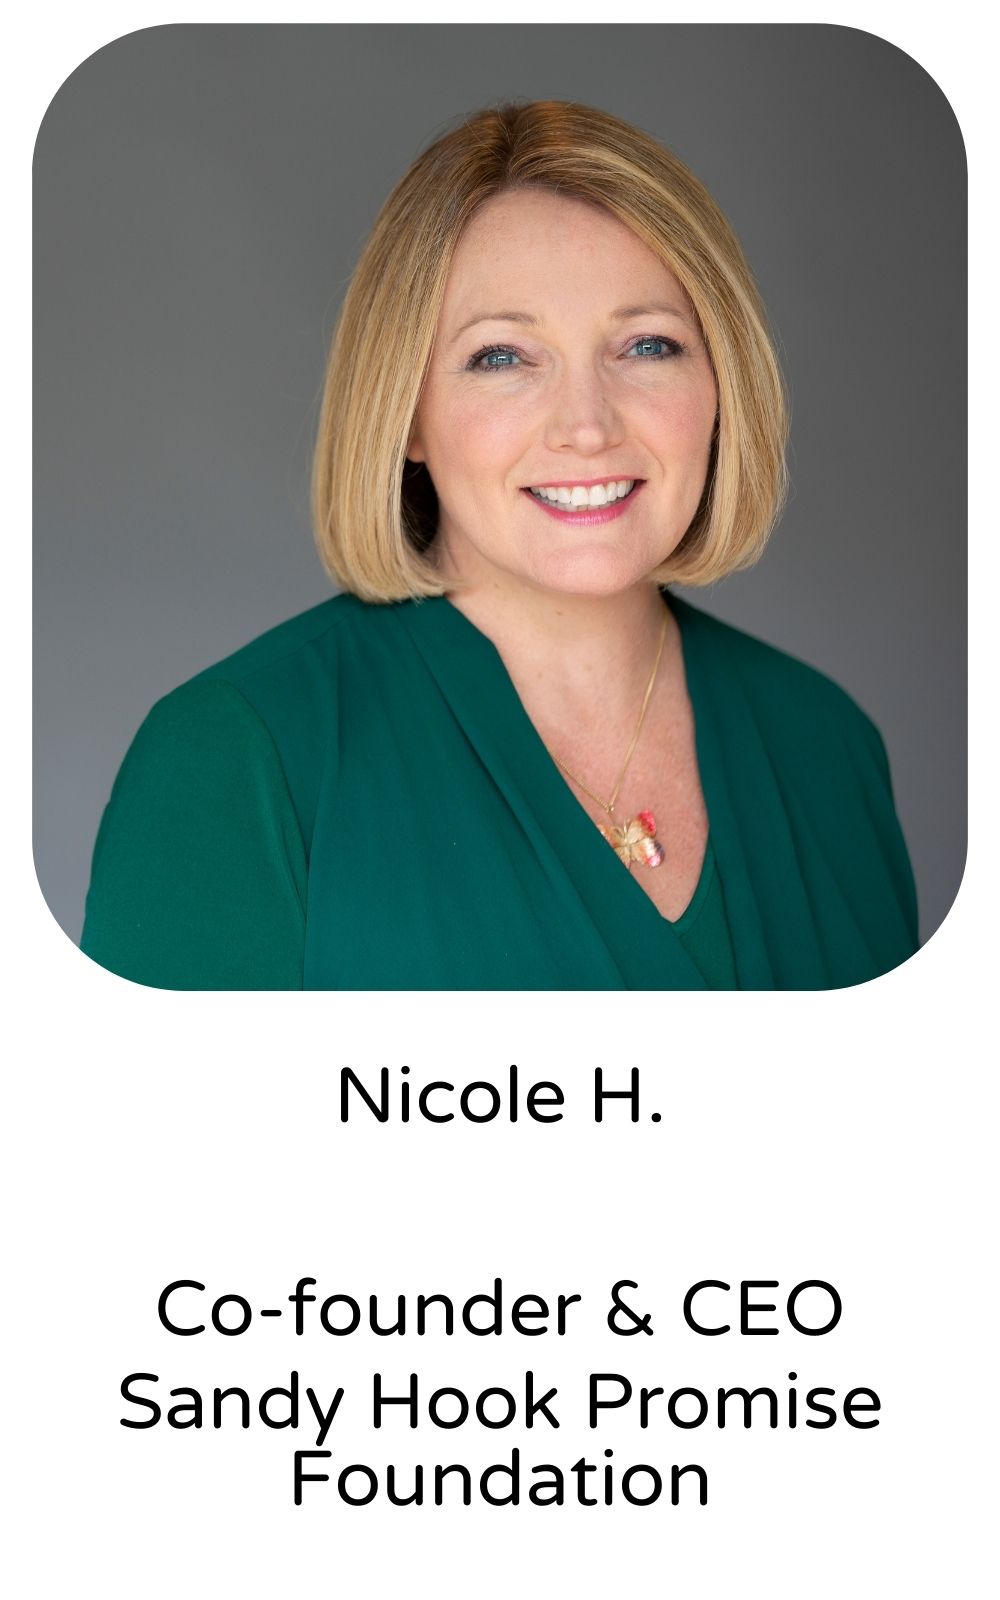 Nicole H, Co-founder & CEO